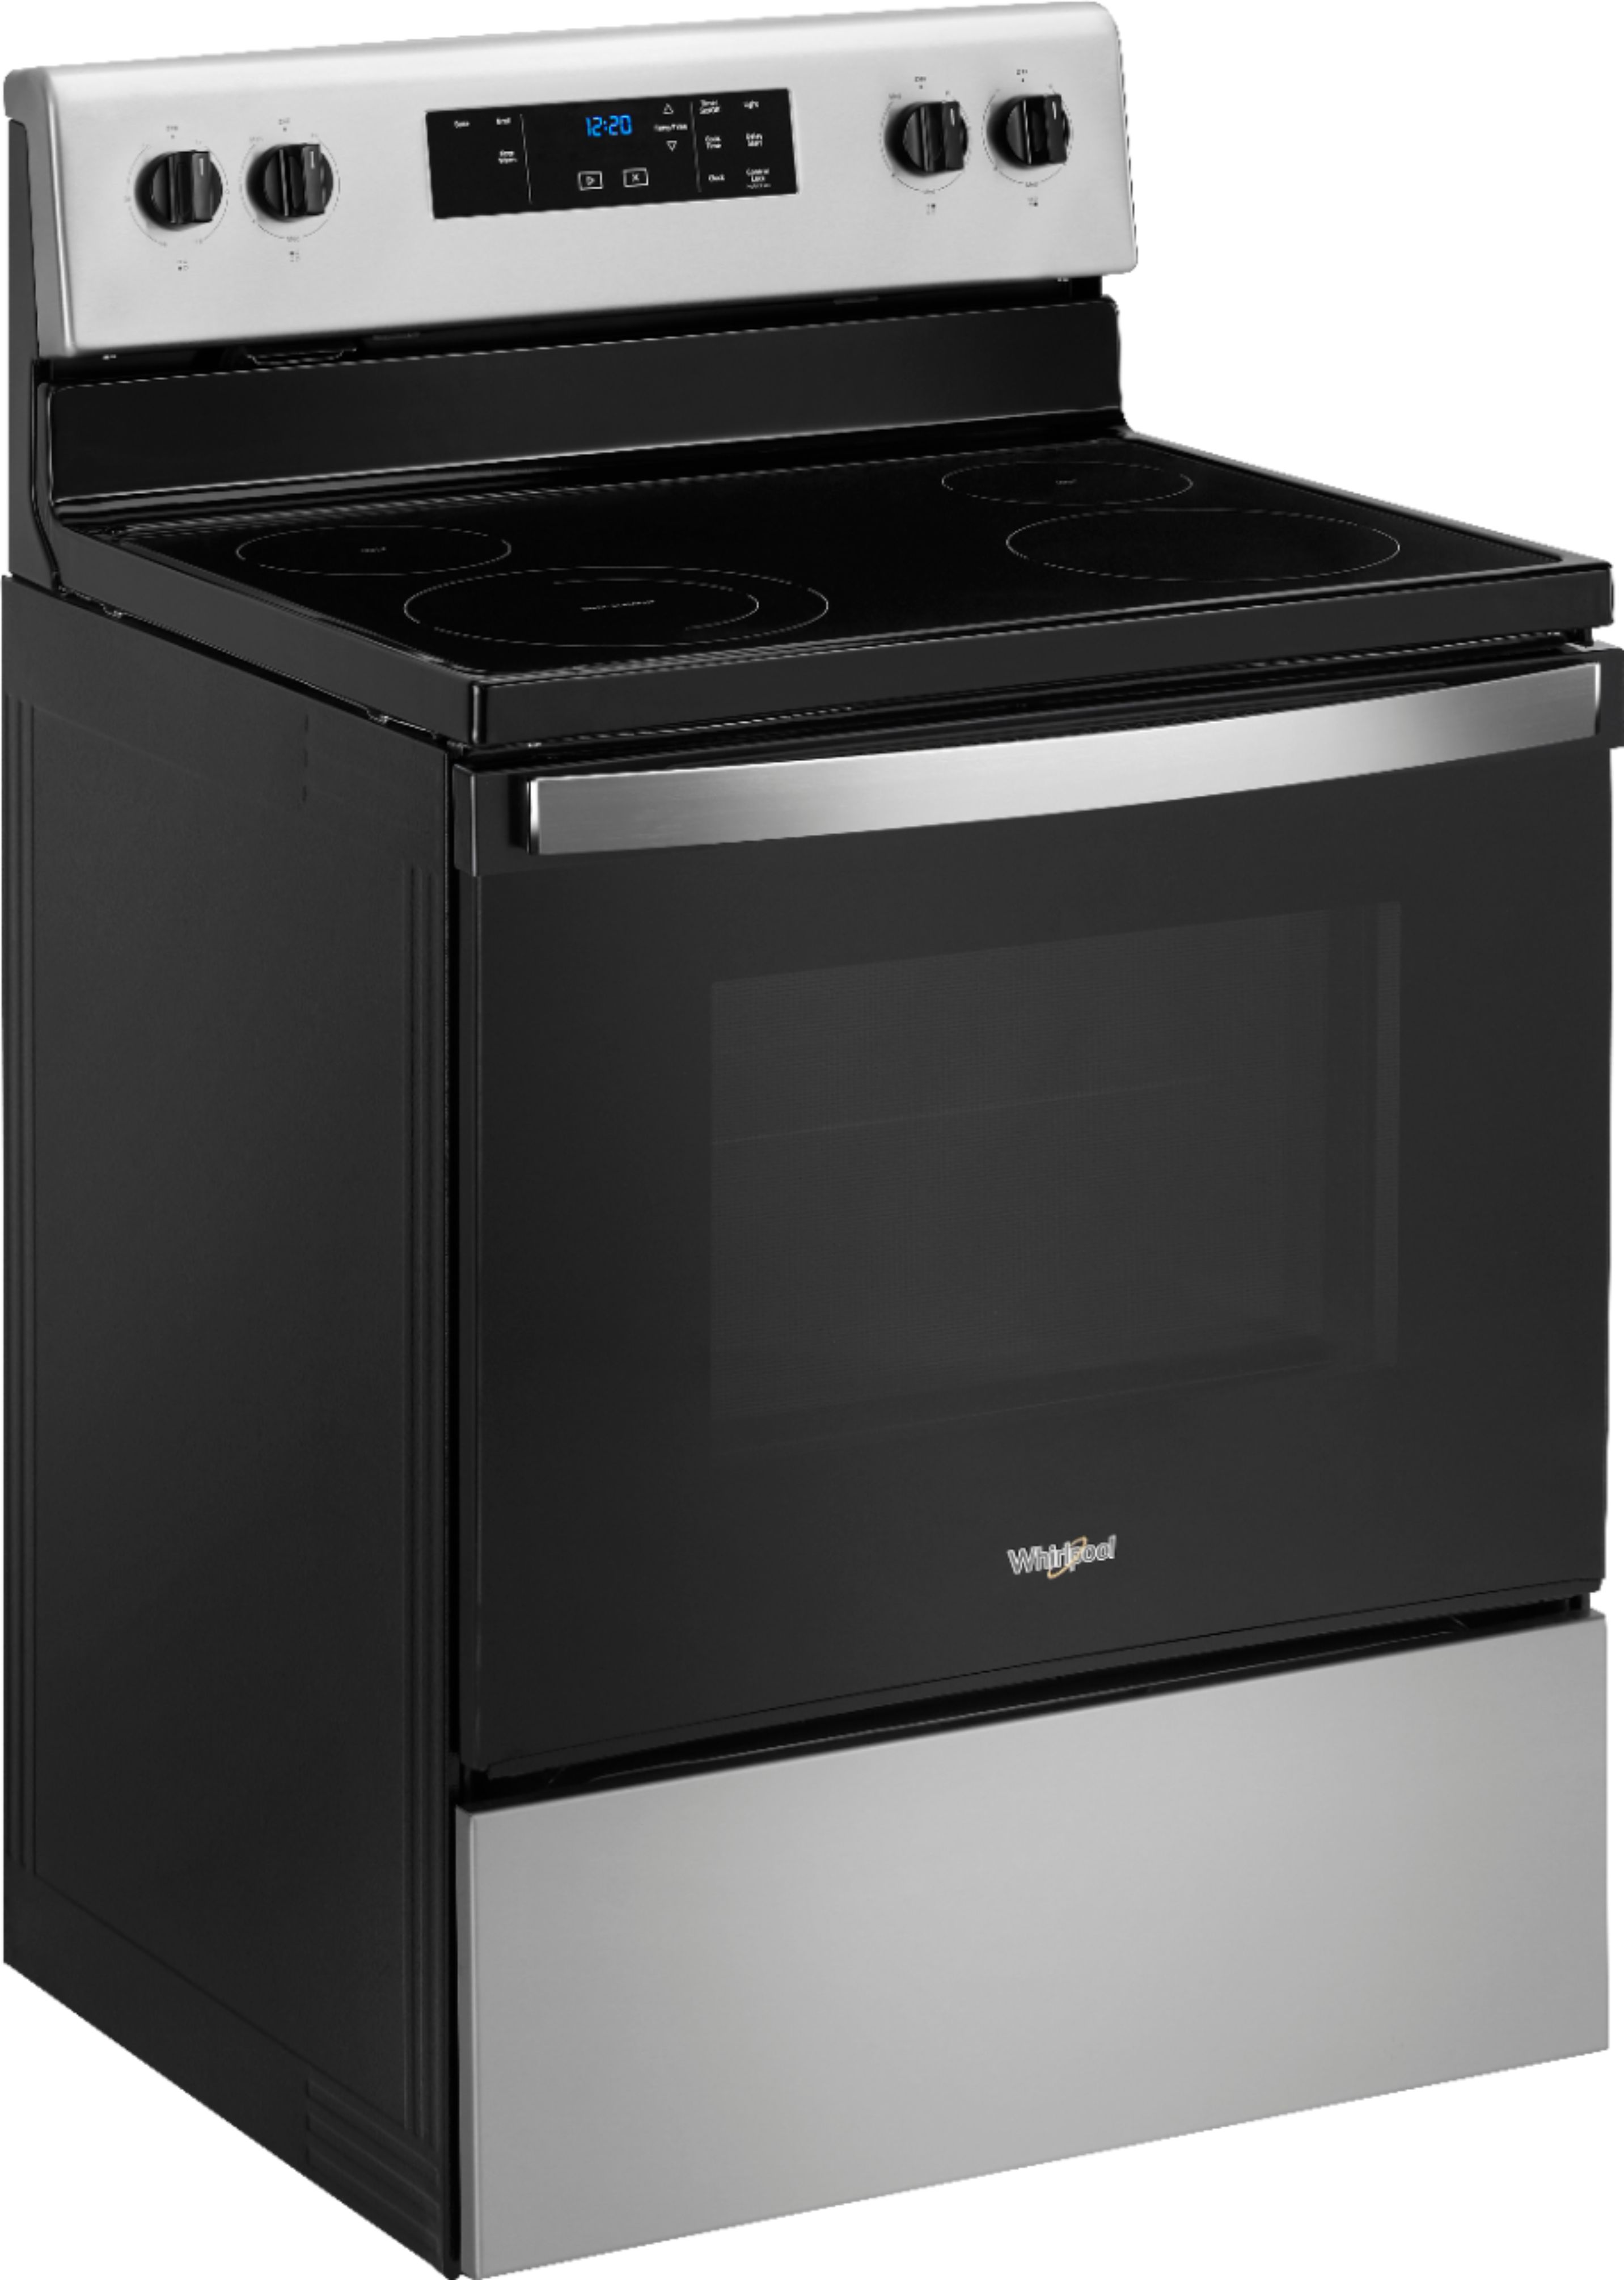 Angle View: GE - 5.3 Cu. Ft. Slide-In Electric Range - Stainless Steel